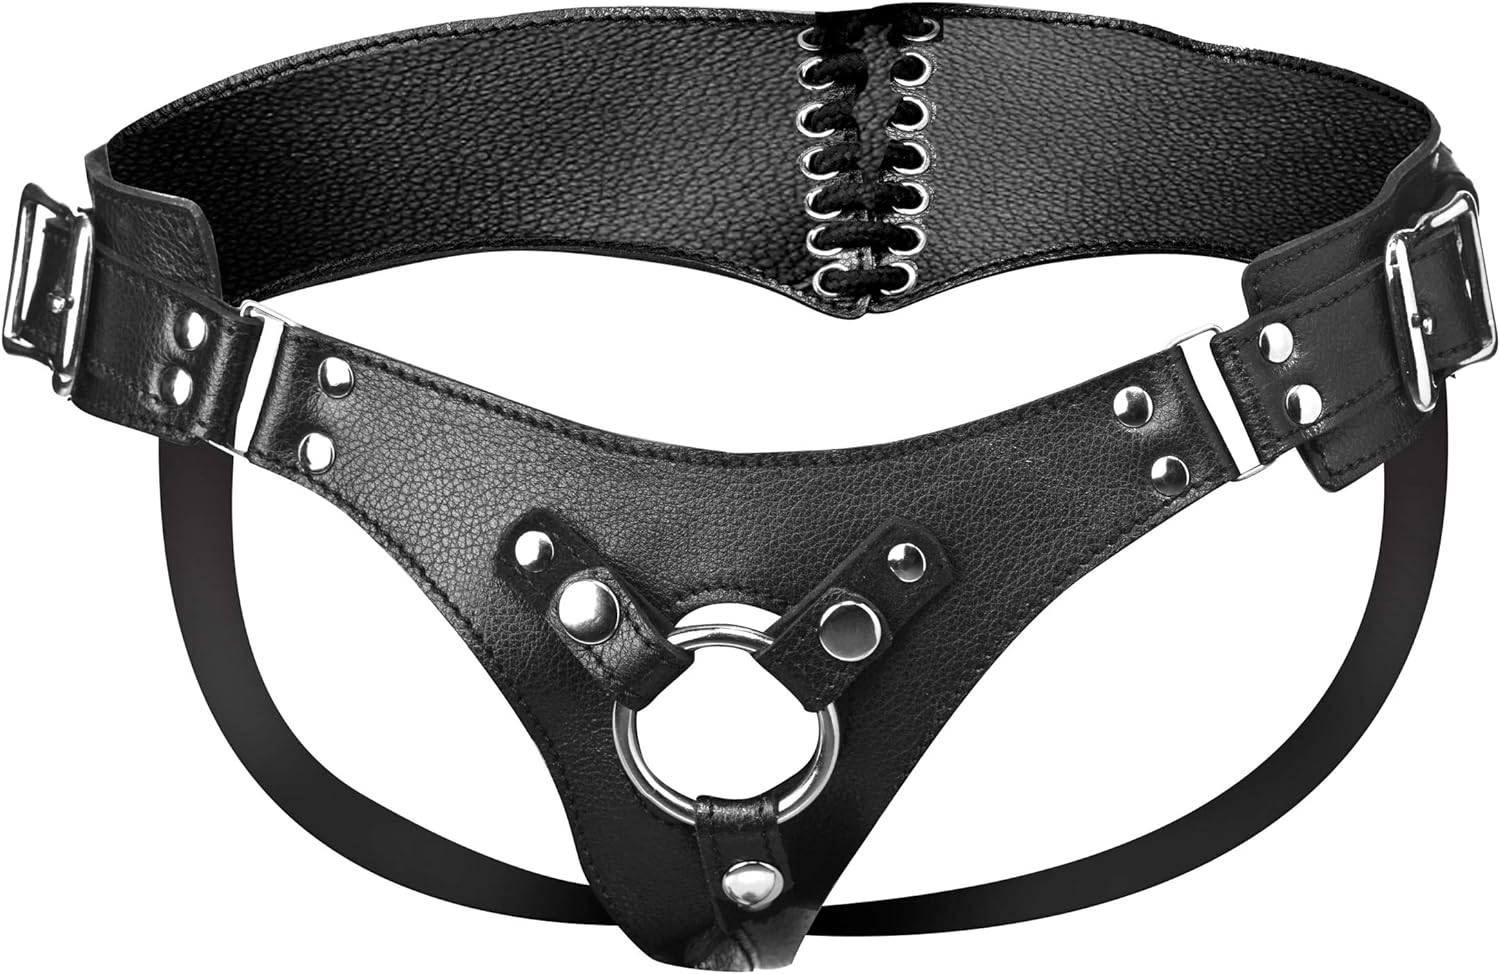 Strap U Bodice Corset Style Strap On Harness for Women, Men and Adult Couples, Fully Adjustable Waist, Vegan Friendly